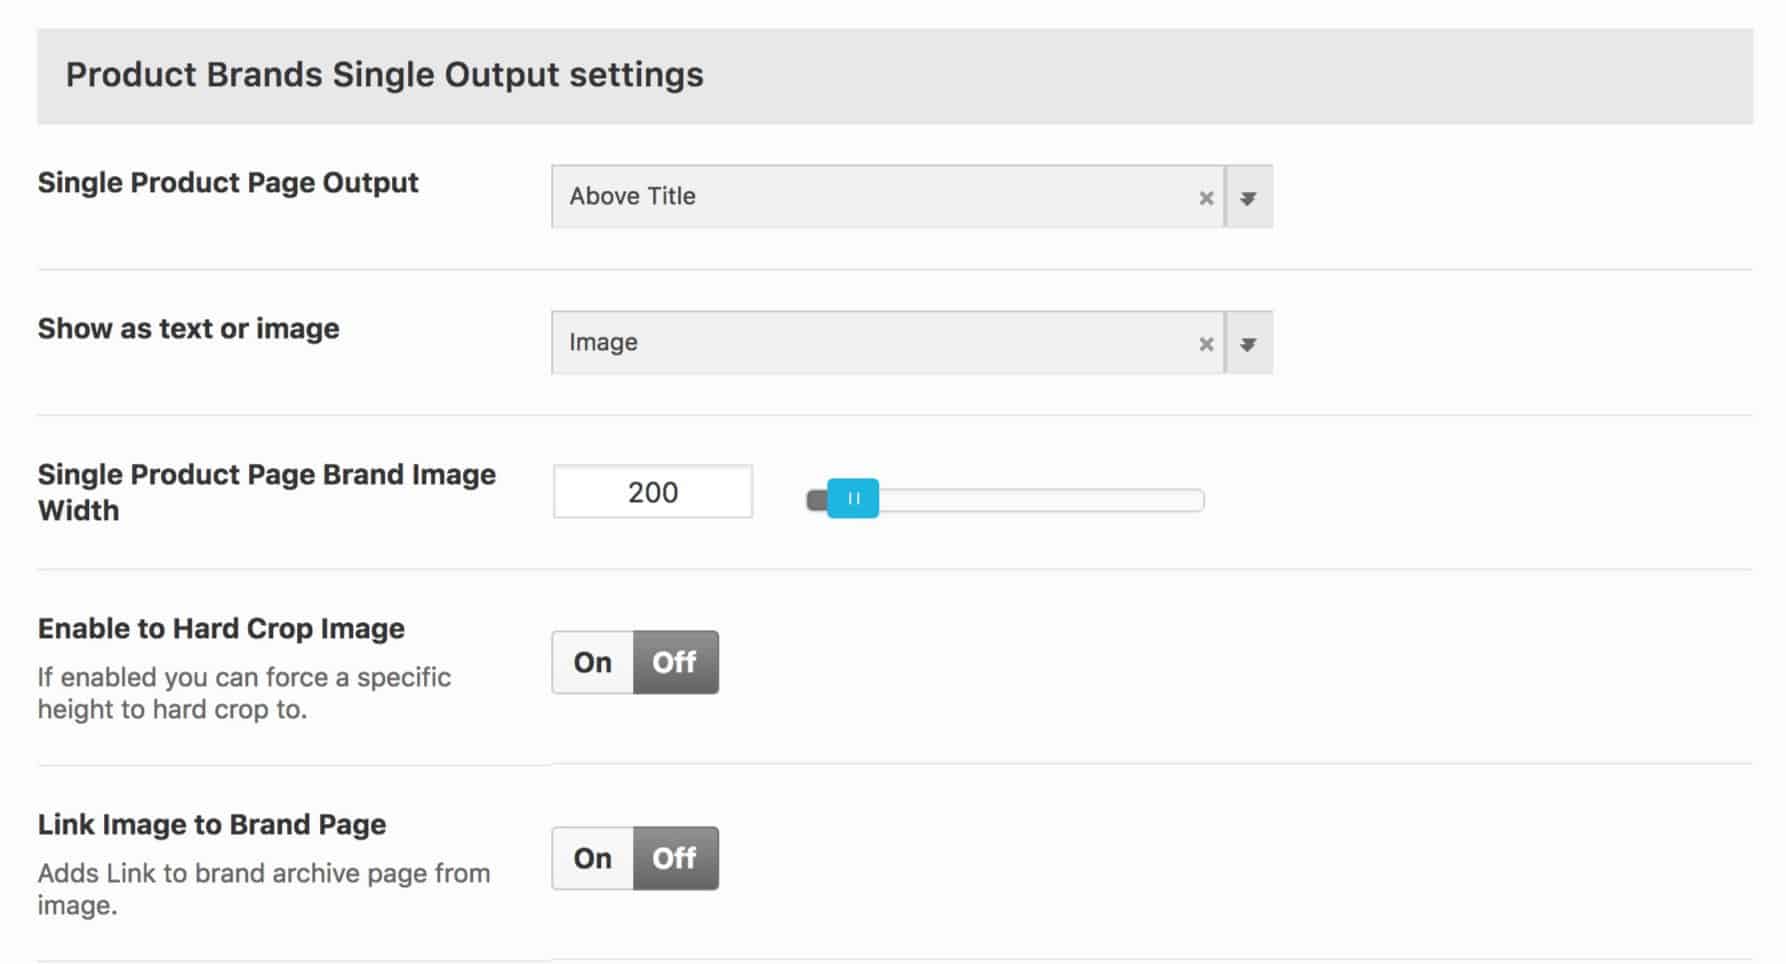 Product Brands Single Output Settings